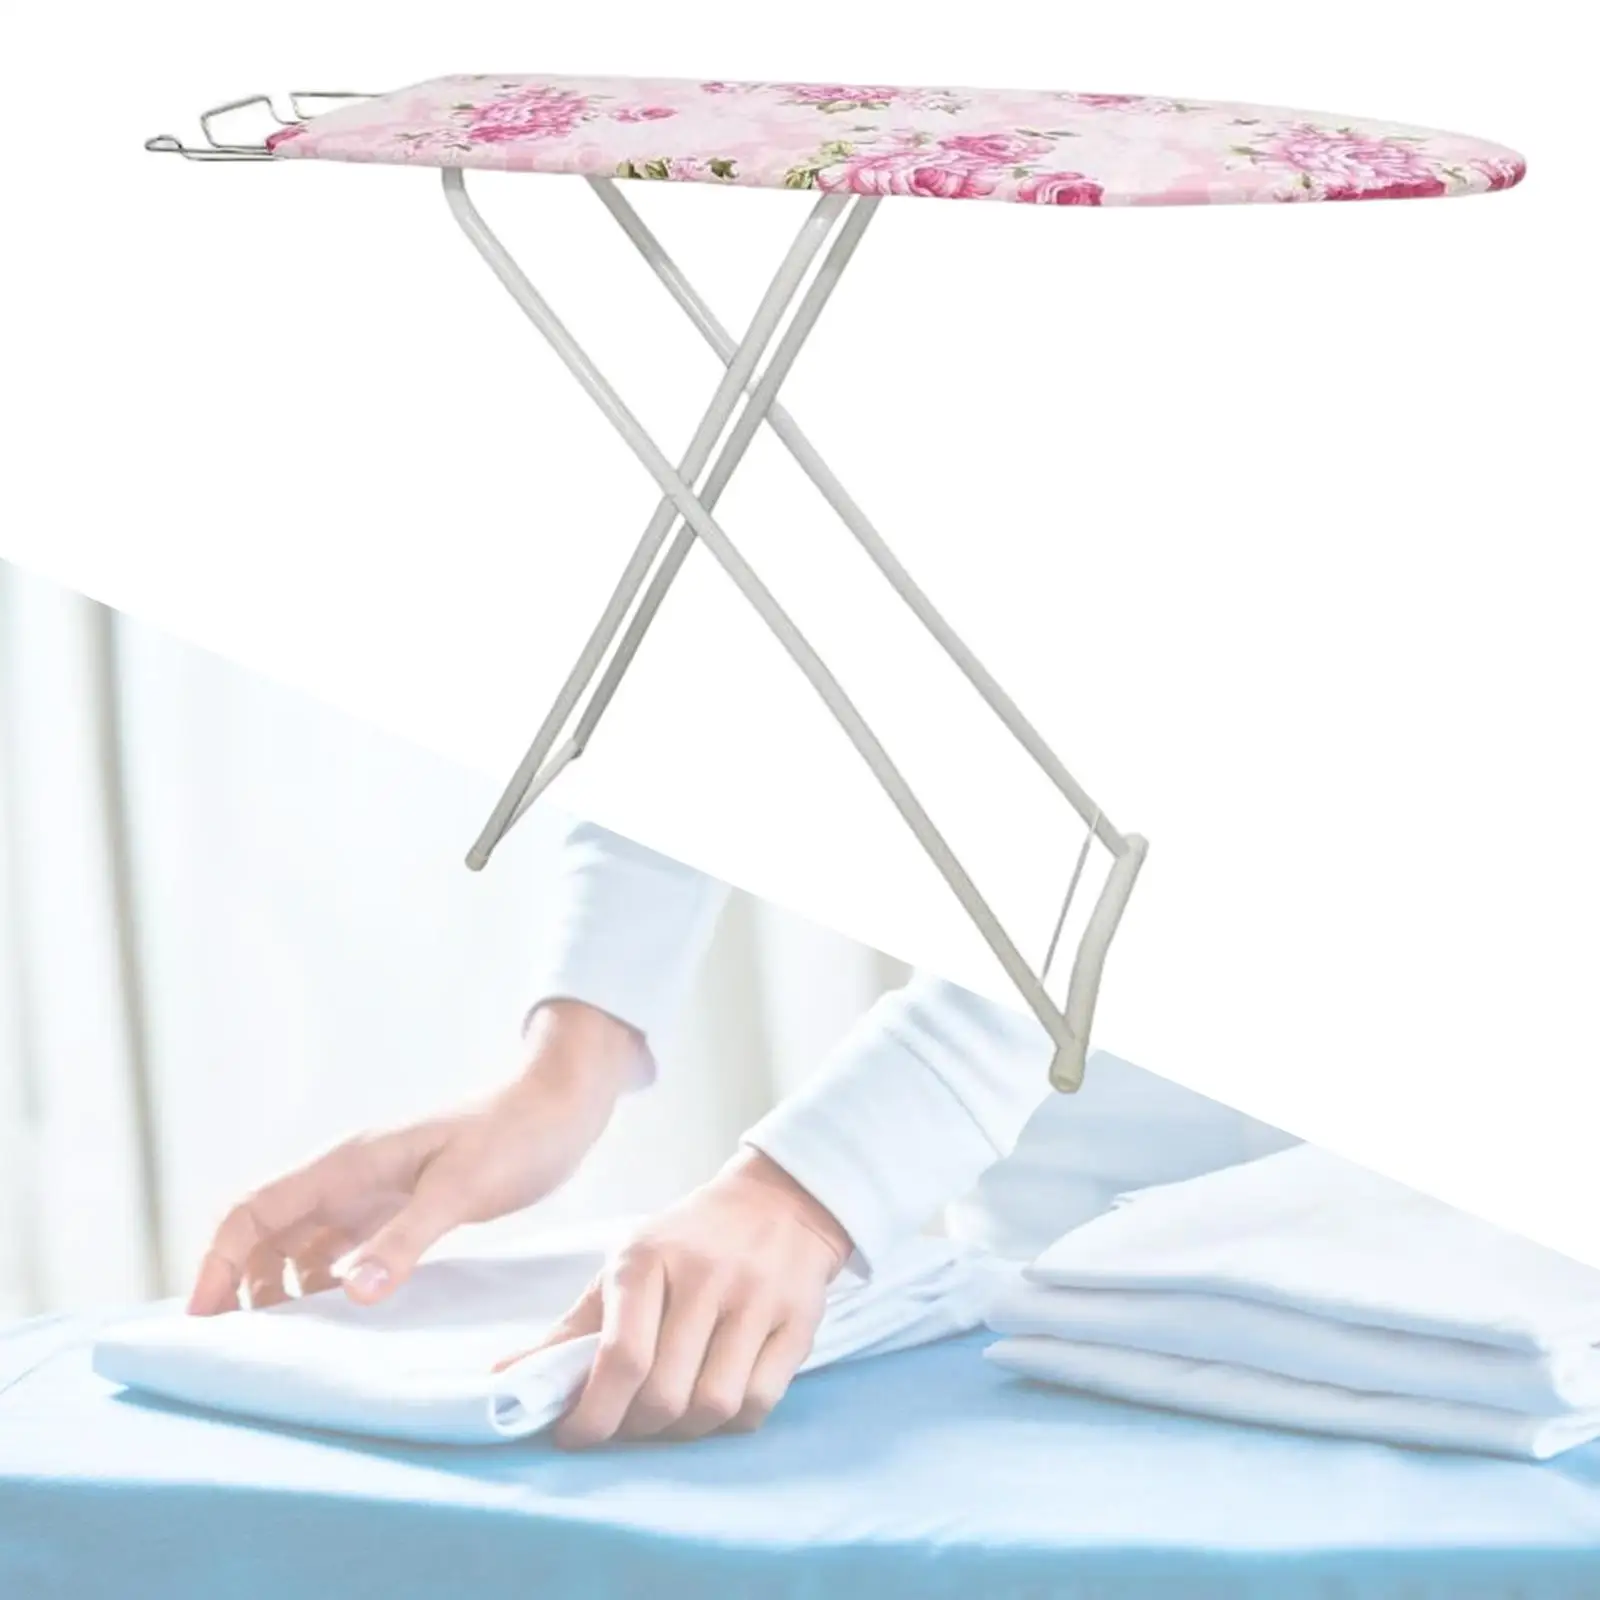 Heavy Duty Portable Folding Mini Iron Board for Household Countertop Sewing